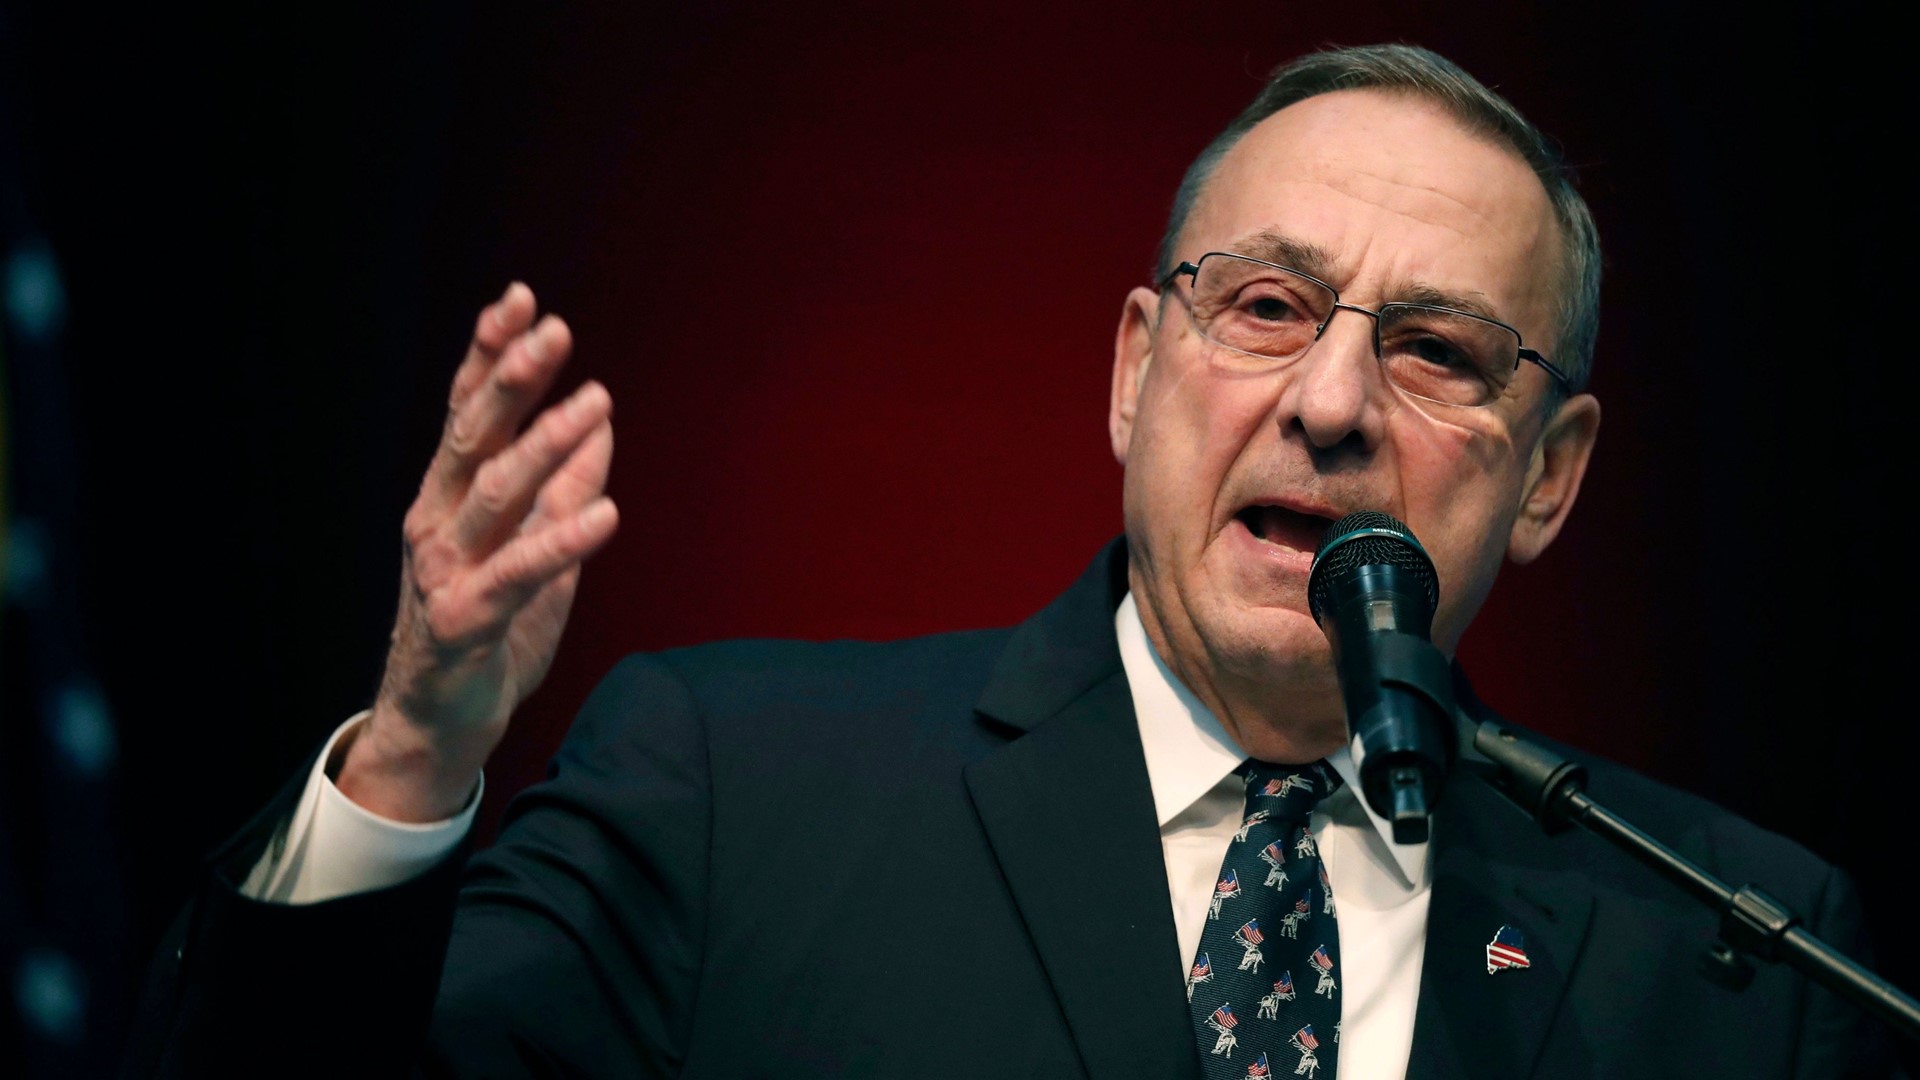 Republican Paul LePage was Maine's Governor from 2011 to 2019. He's officially launching his campaign for the state's 2022 gubernatorial election on September 22.